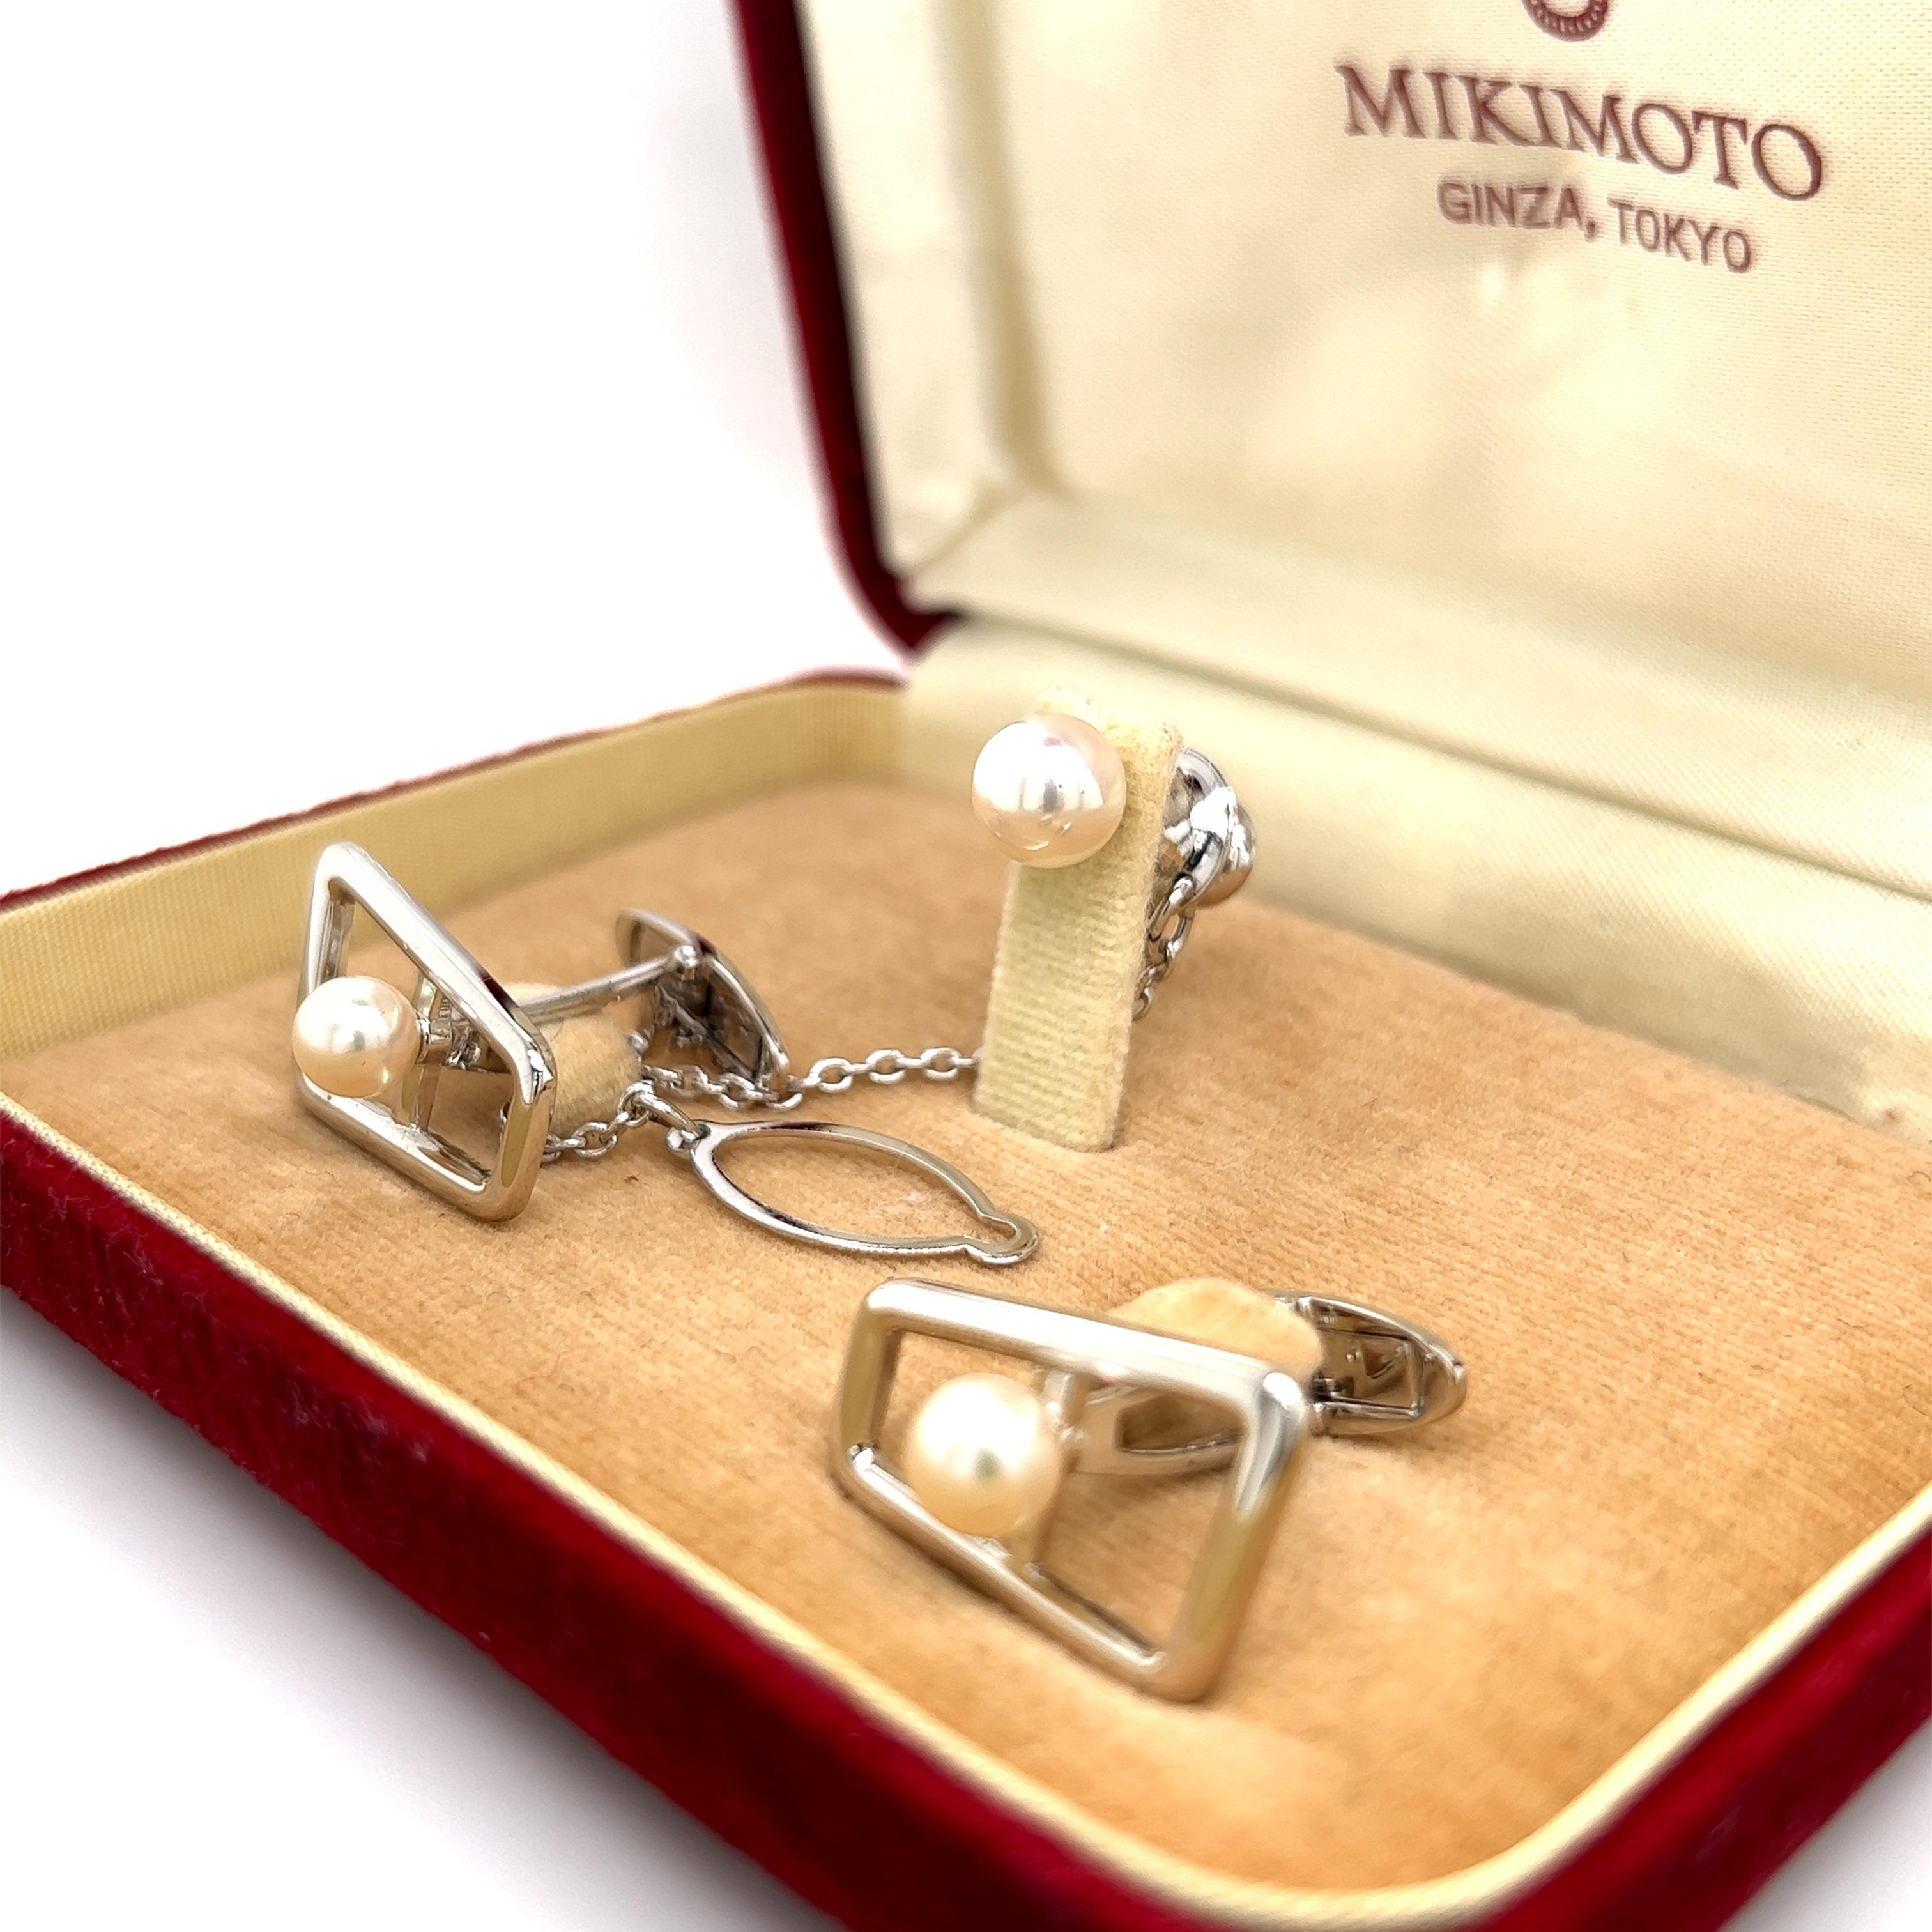 Mikimoto Estate Akoya Pearl Cufflinks and Tie Pin Sterling Silver 1